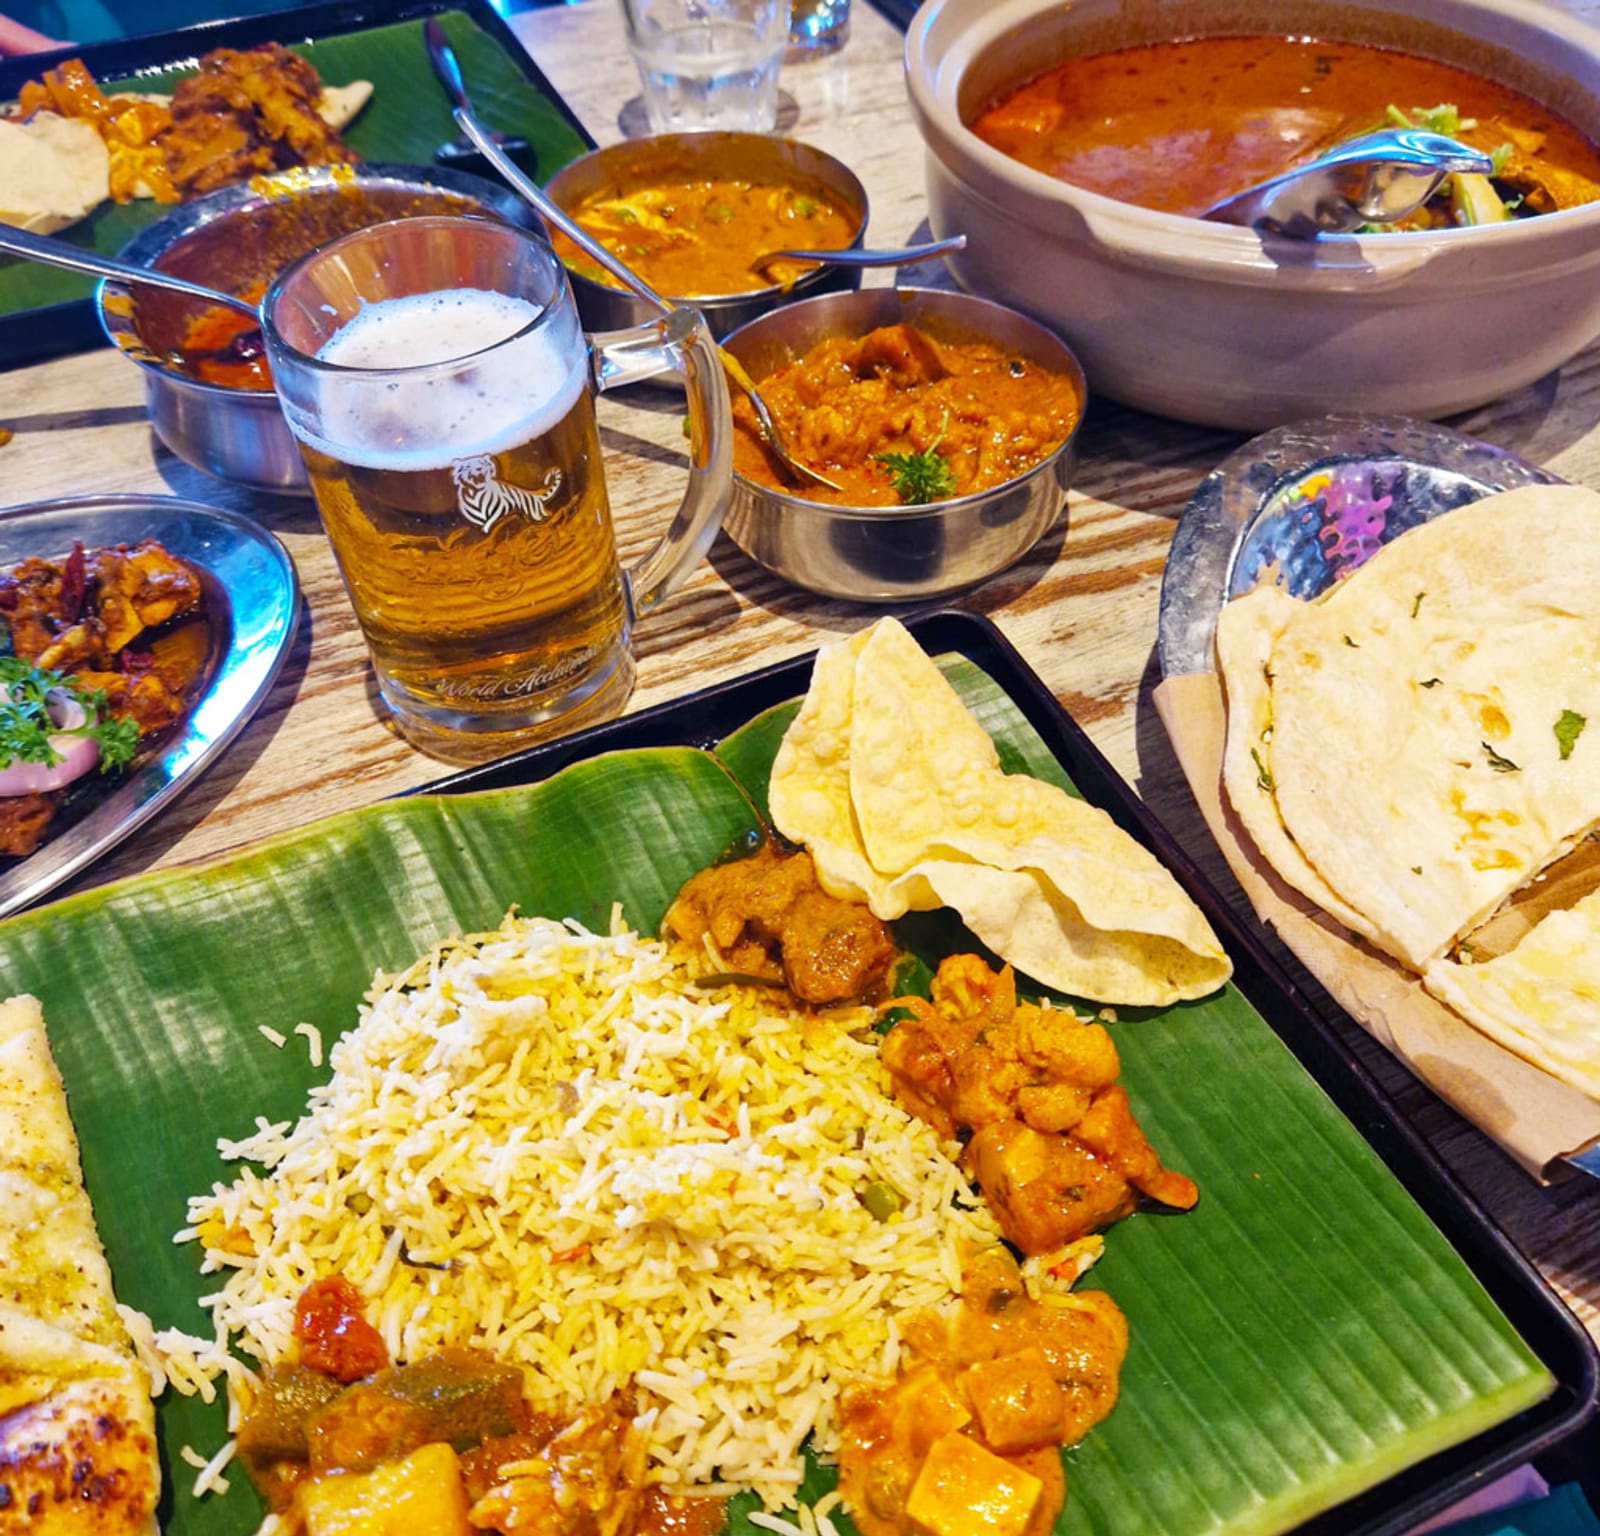 Food spread in Singapore